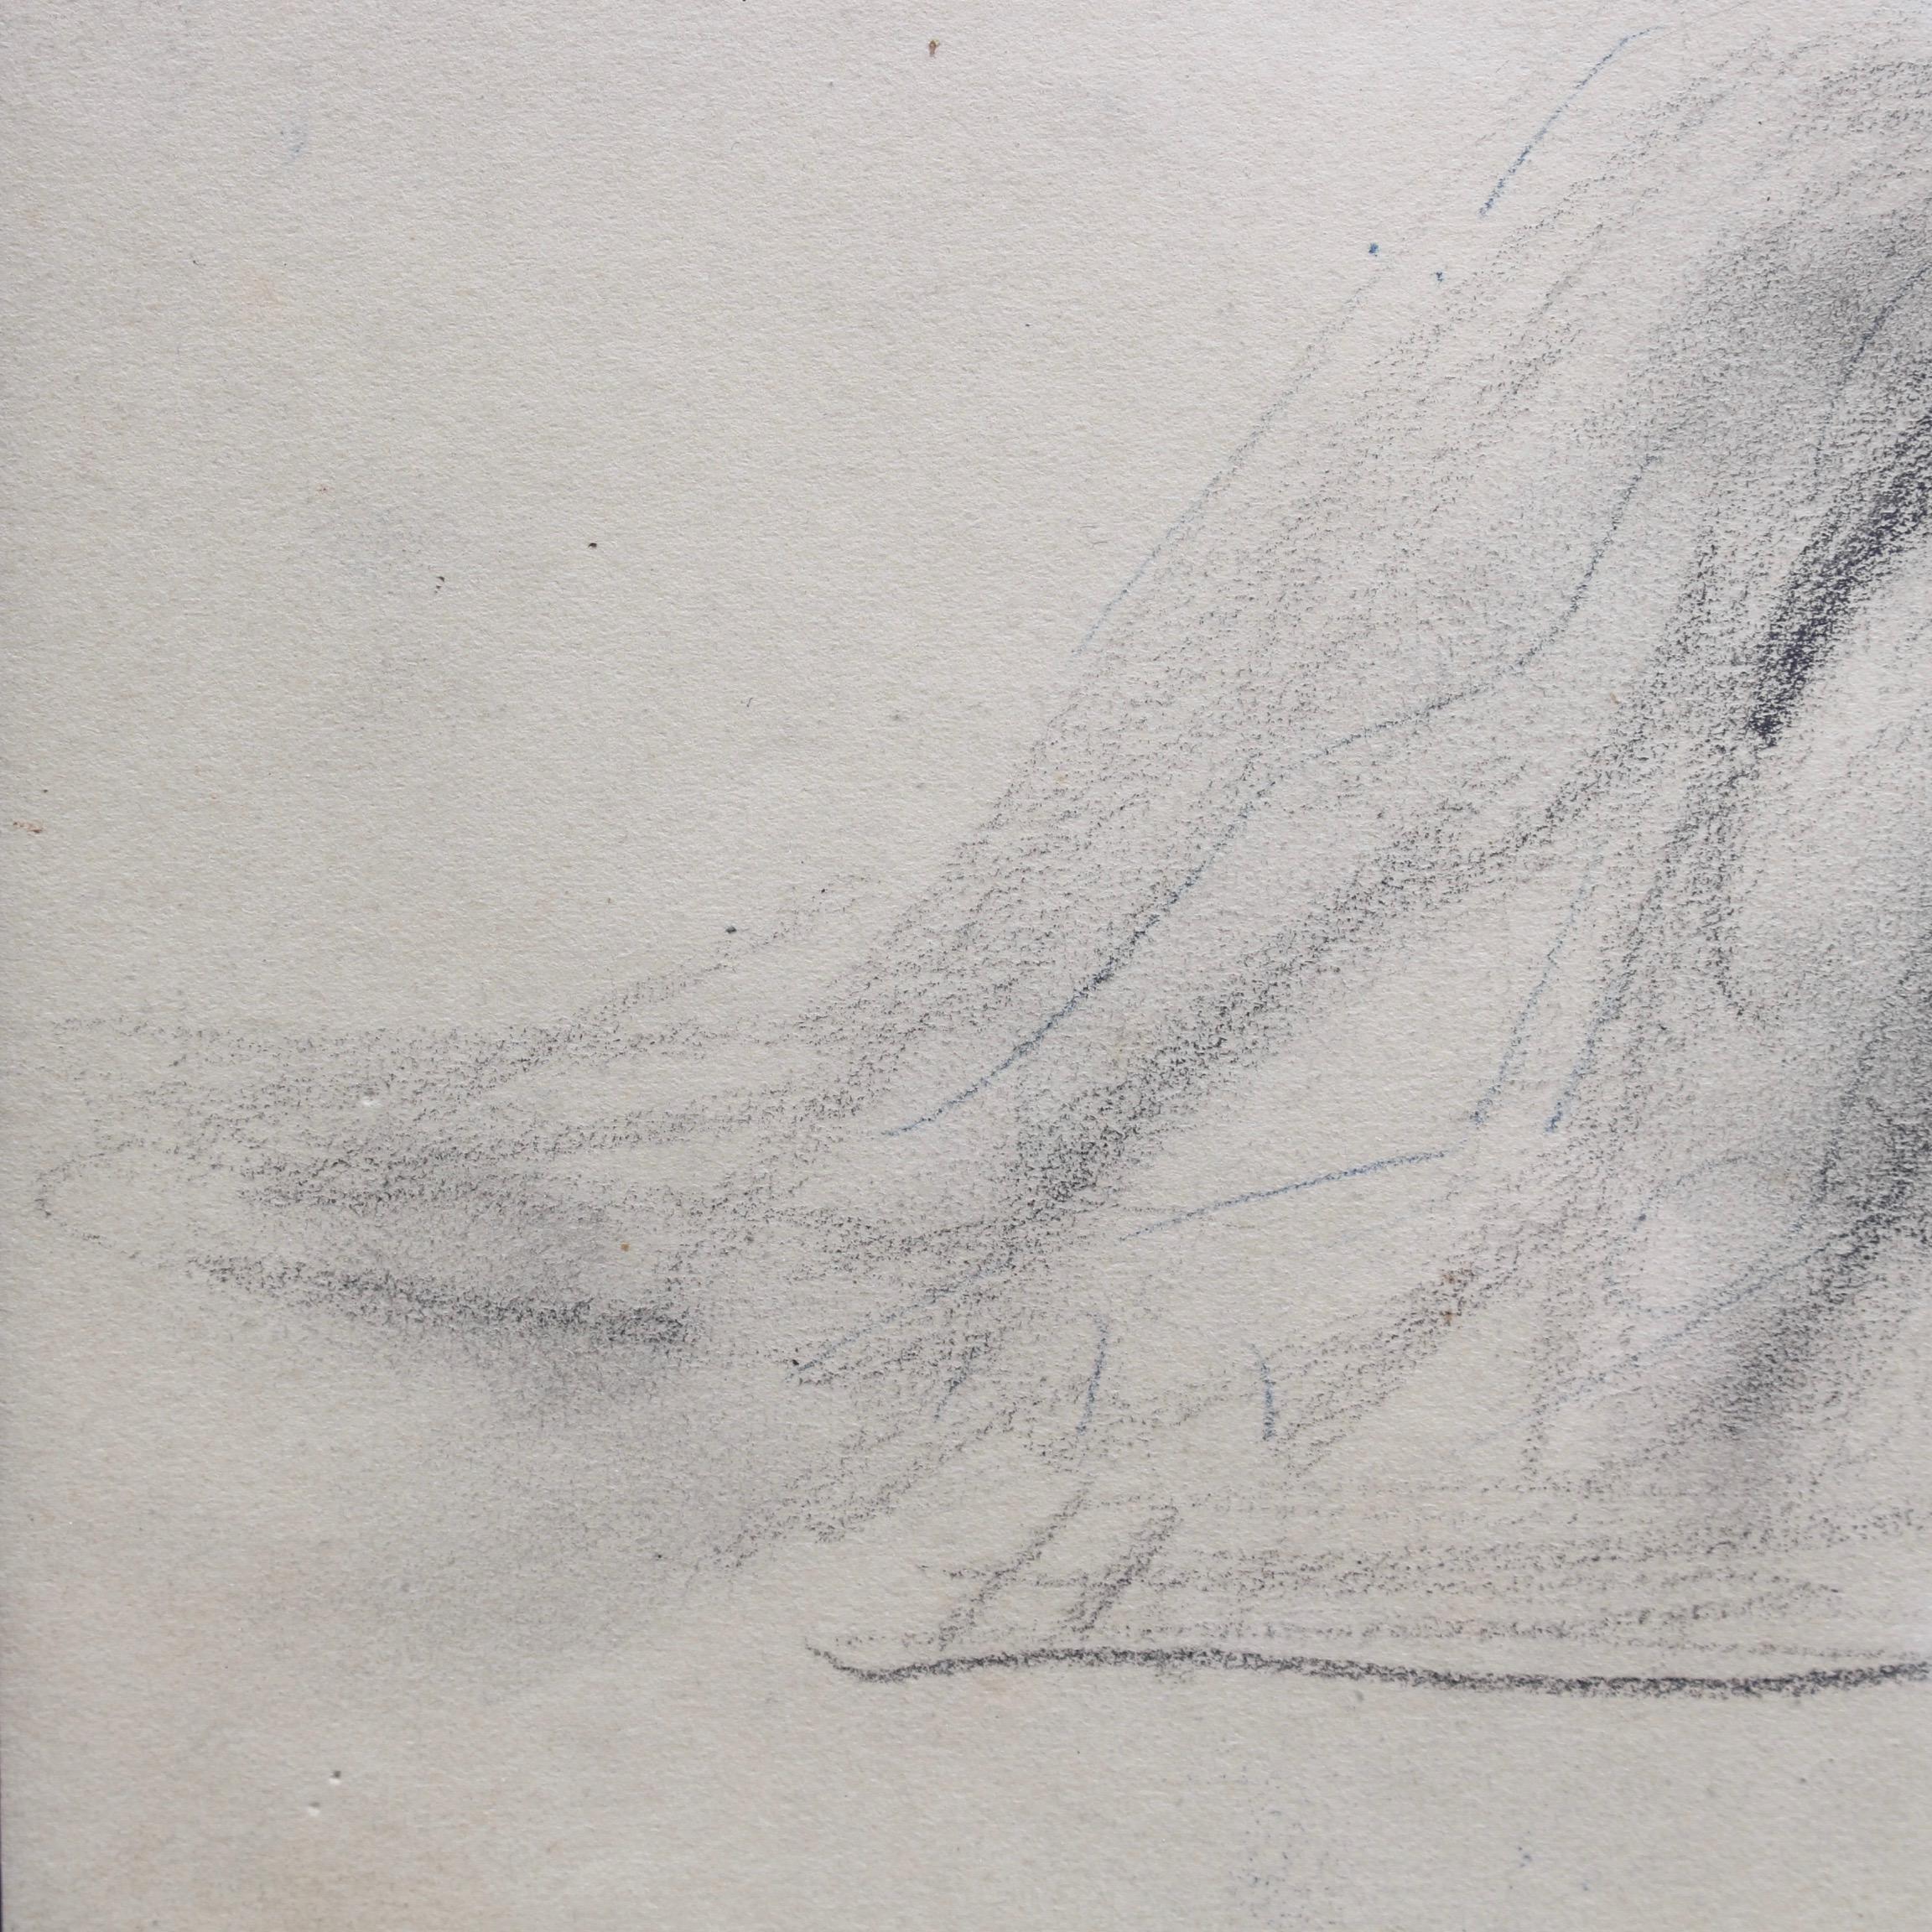 'Study of Male Nude', pencil and charcoal on fine art paper, by Guillaume Dulac (circa 1920s). An artist known for his exquisite drawings - many are sketches for his larger oil paintings or other works - this piece is compelling because the artist